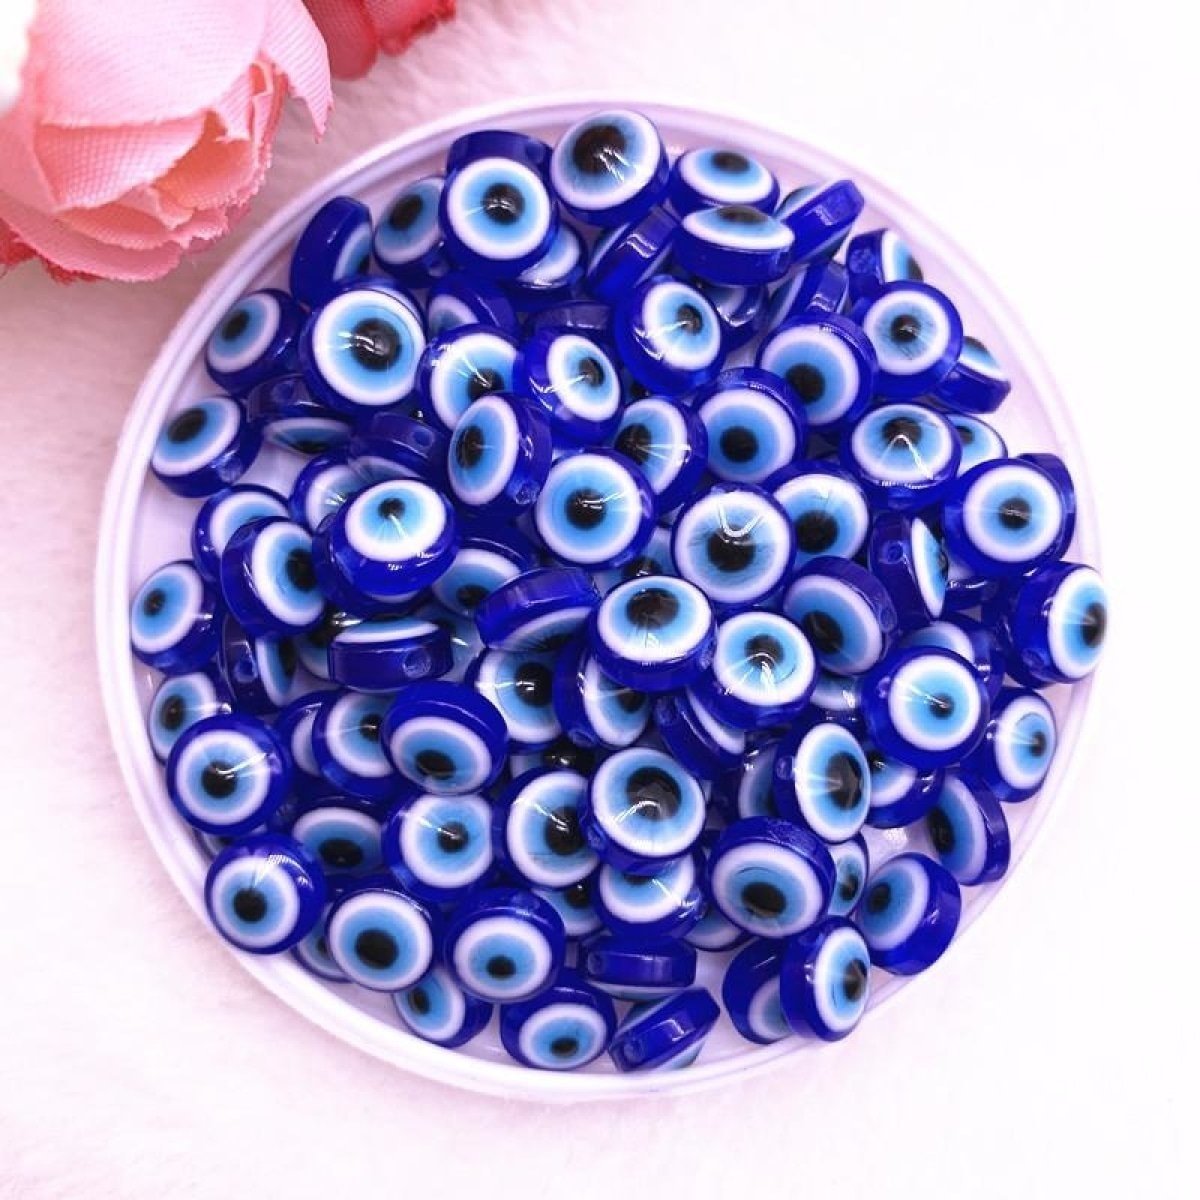 48pcs 8/10mm Resin Spacer Beads Double Sided Eyes for Jewellery Making DIY Bracelet Beads Flat Backed - Blues 8mm - - Asia Sell